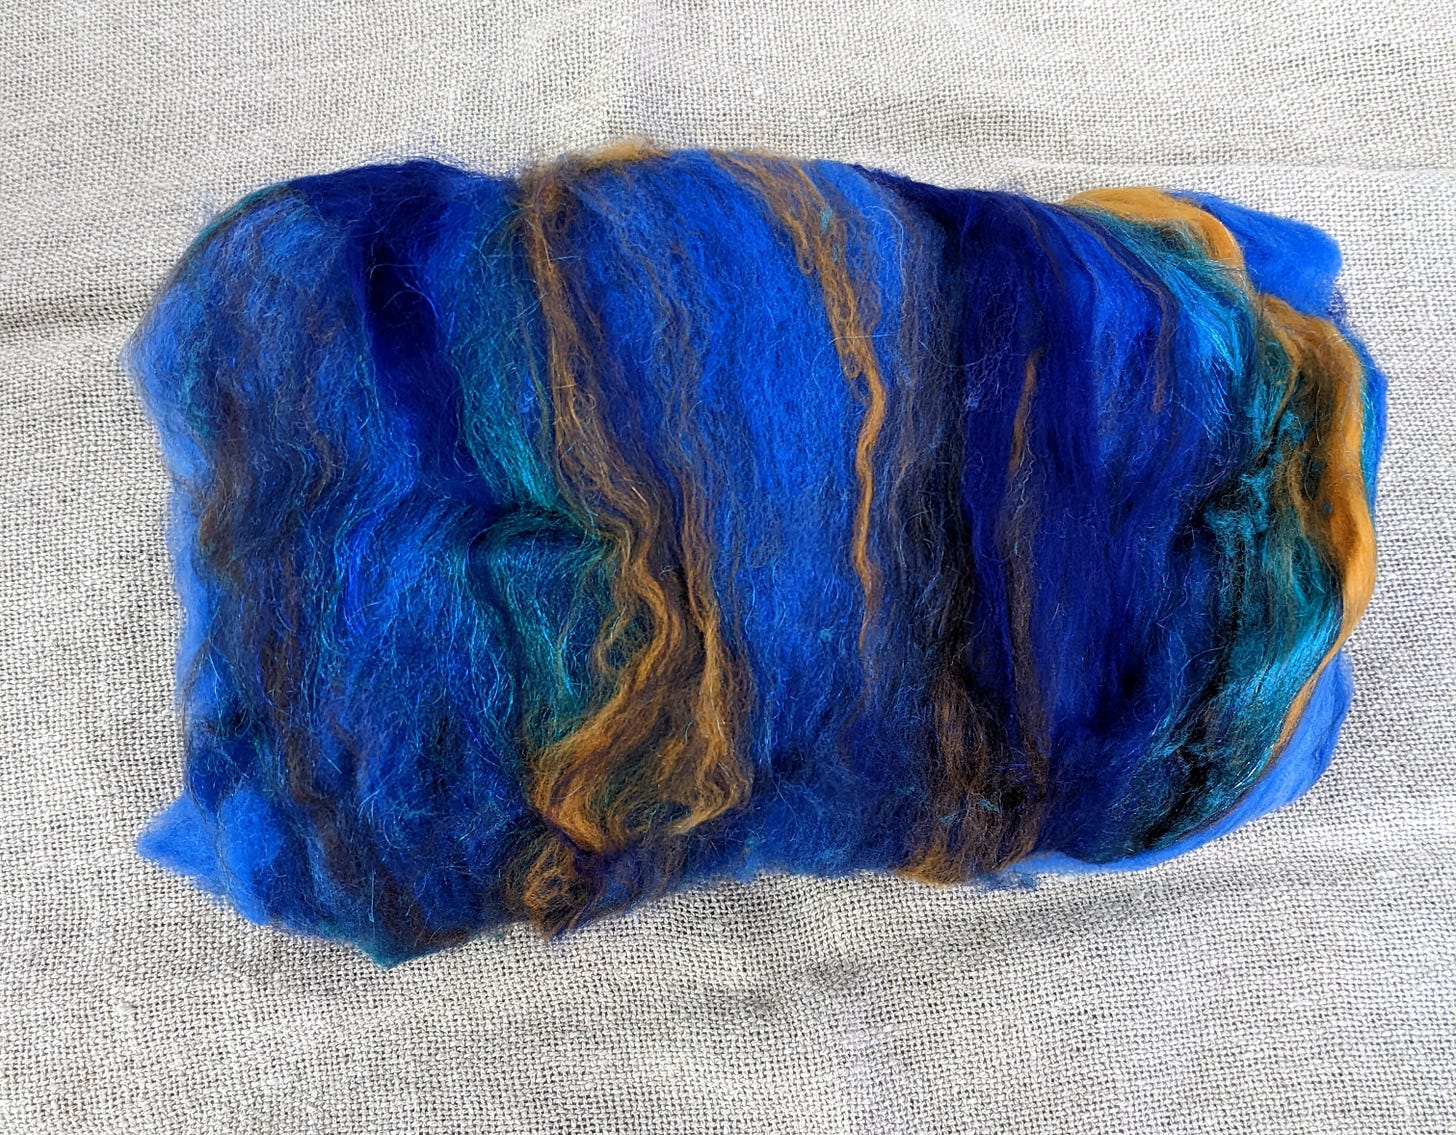 A blue batt of wool streaked with gold and teal